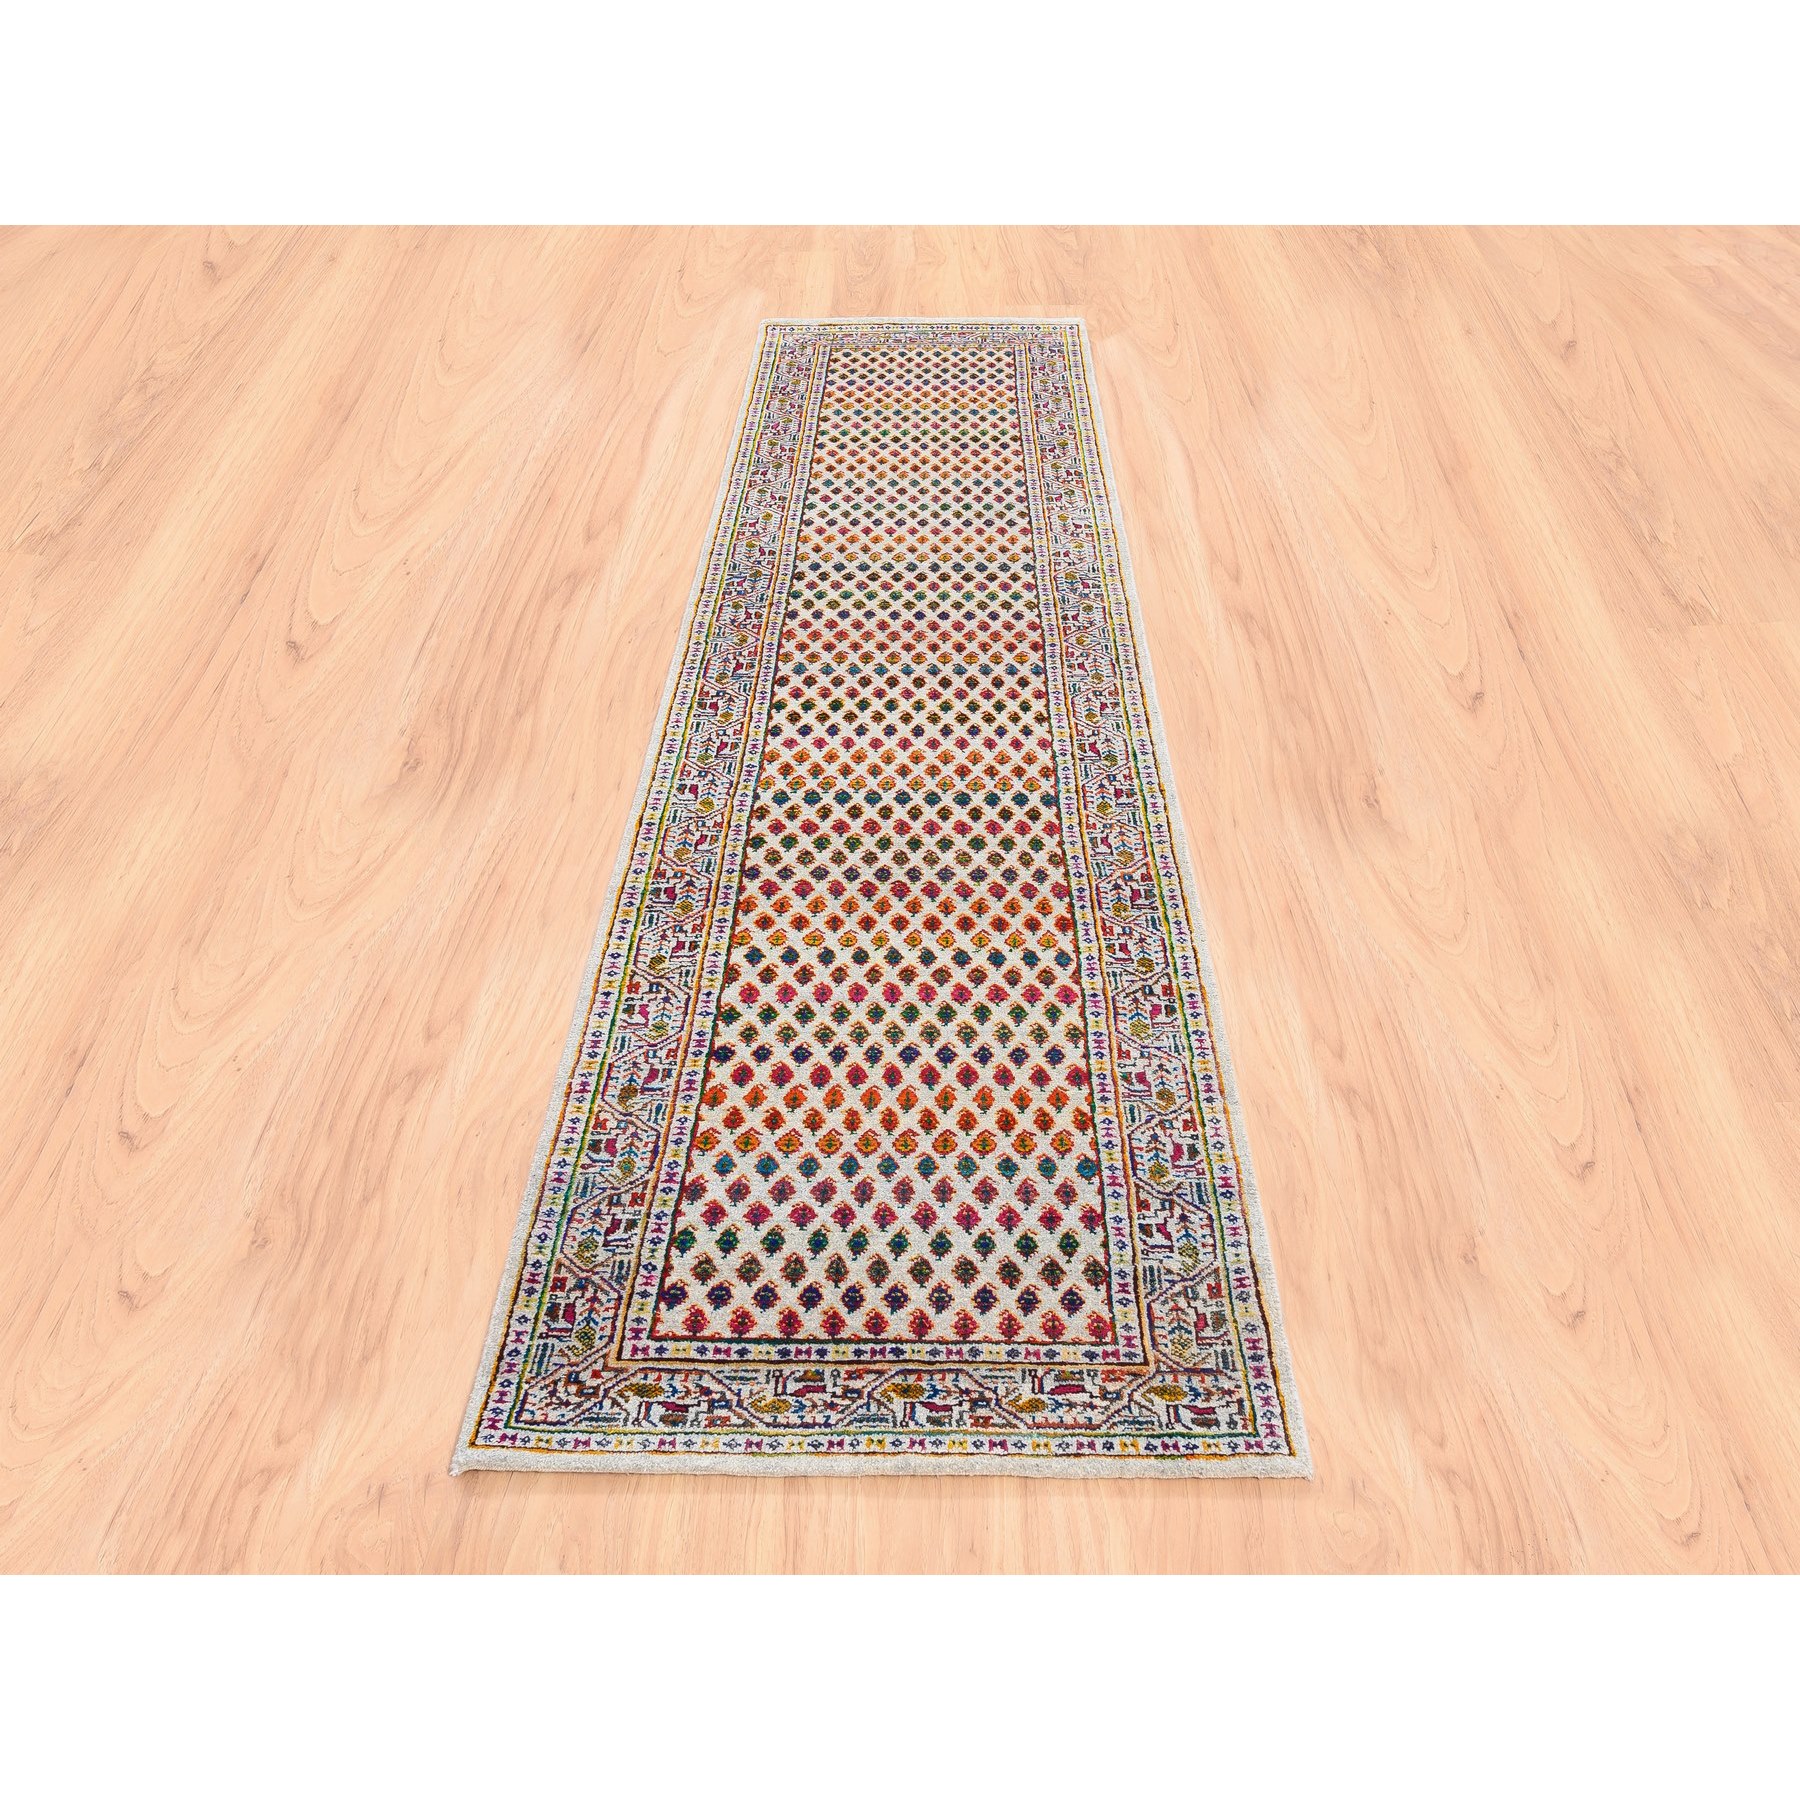 2'4"x10'2" Colorful Wool And Sari Silk Sarouk Mir Inspired With Repetitive Boteh Design Hand Woven Oriental Runner Rug 